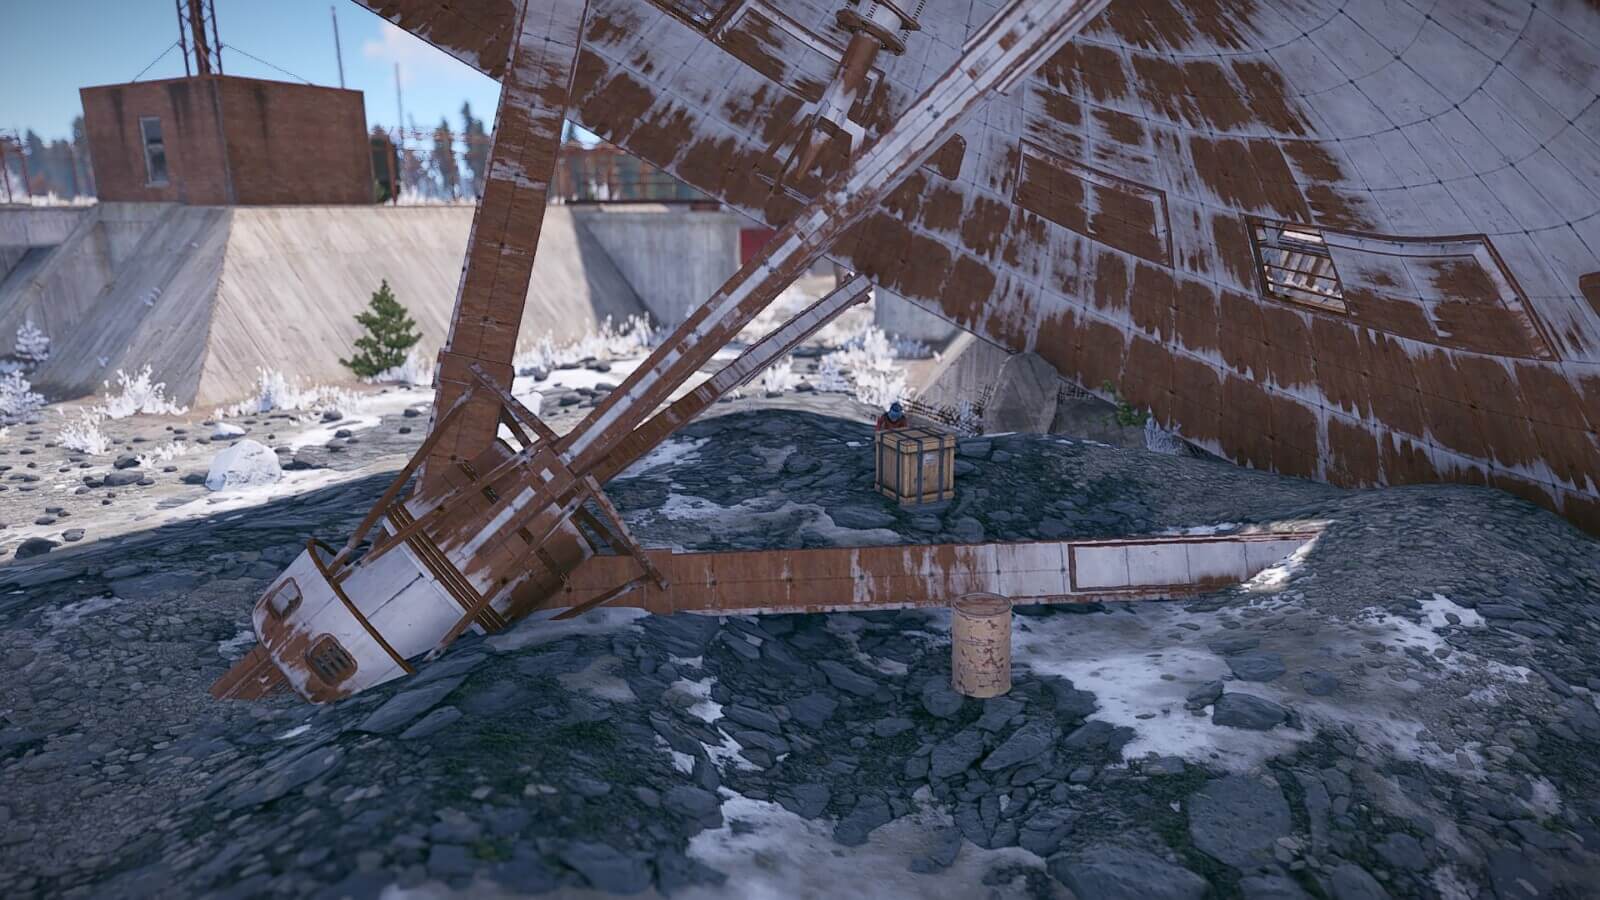 Under the broken satellite dish you'll find a crate spawn along with a barrel spawn or two.